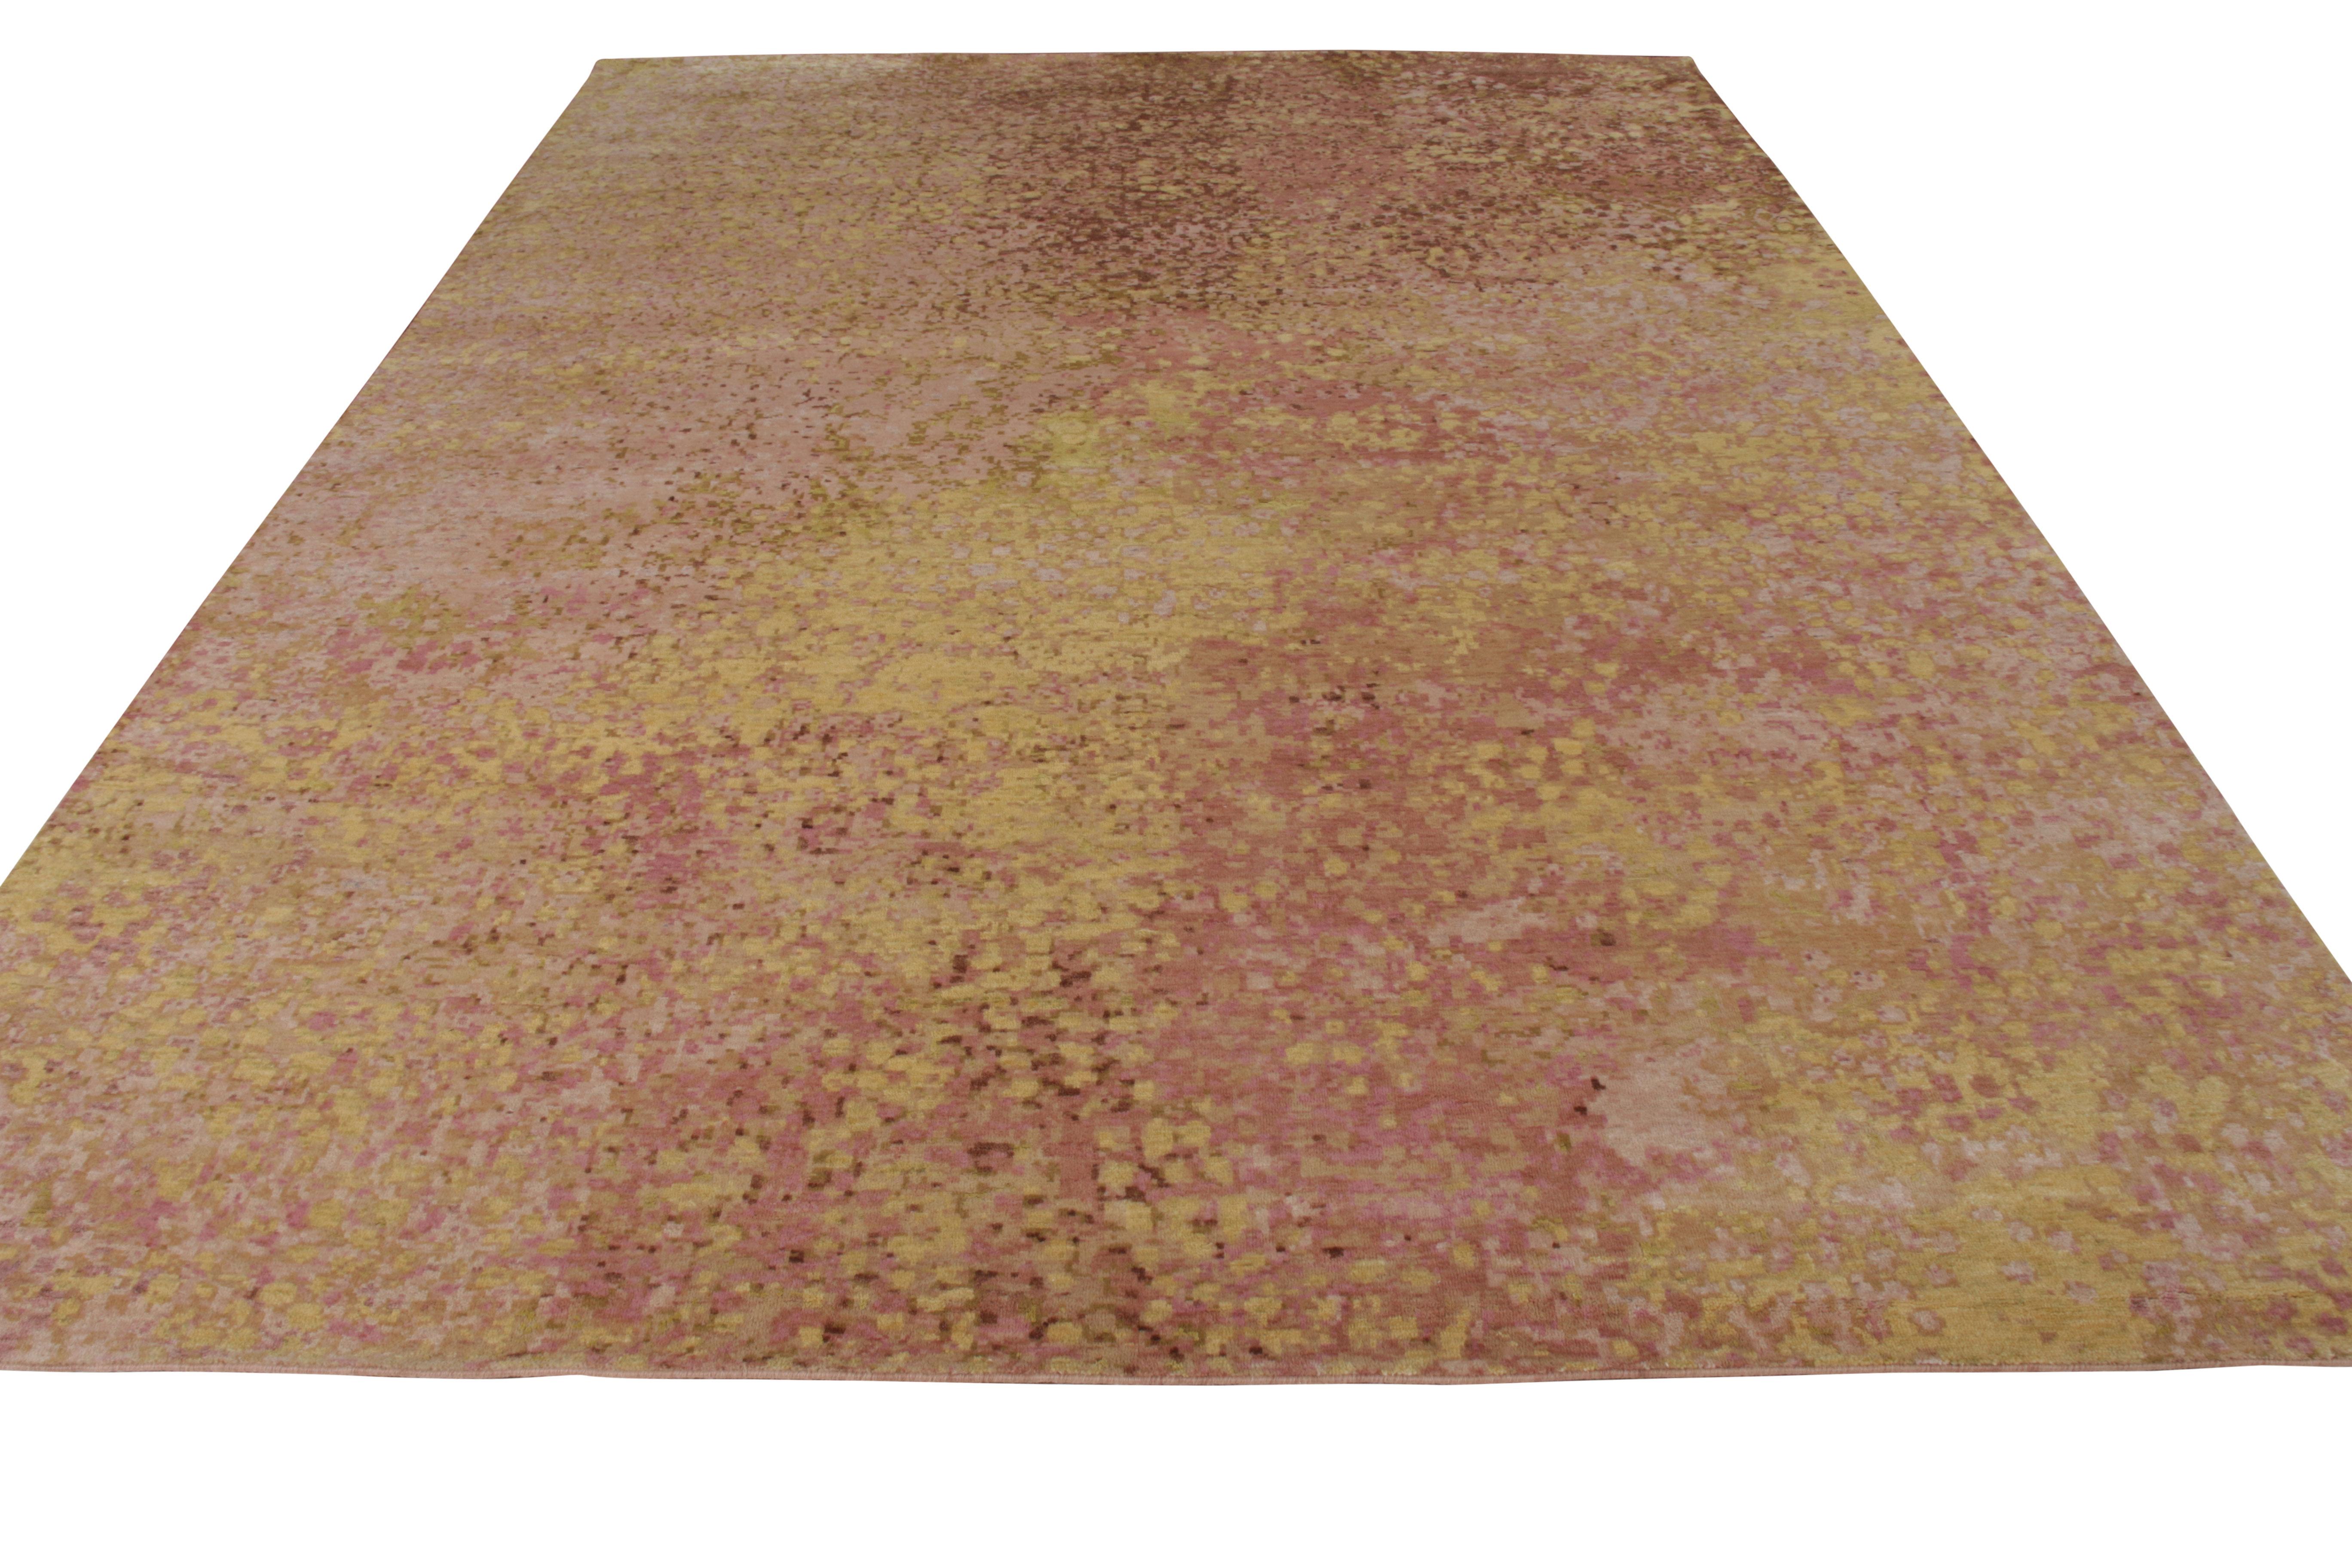 A 9 x 12 abstract rug in pink and gold, from the new Dots Collection by Rug & Kilim. Hand knotted in wool, enjoying a modern take on layered patterns for a unique look of dimensionality and movement.

On the design: This particular dots rug